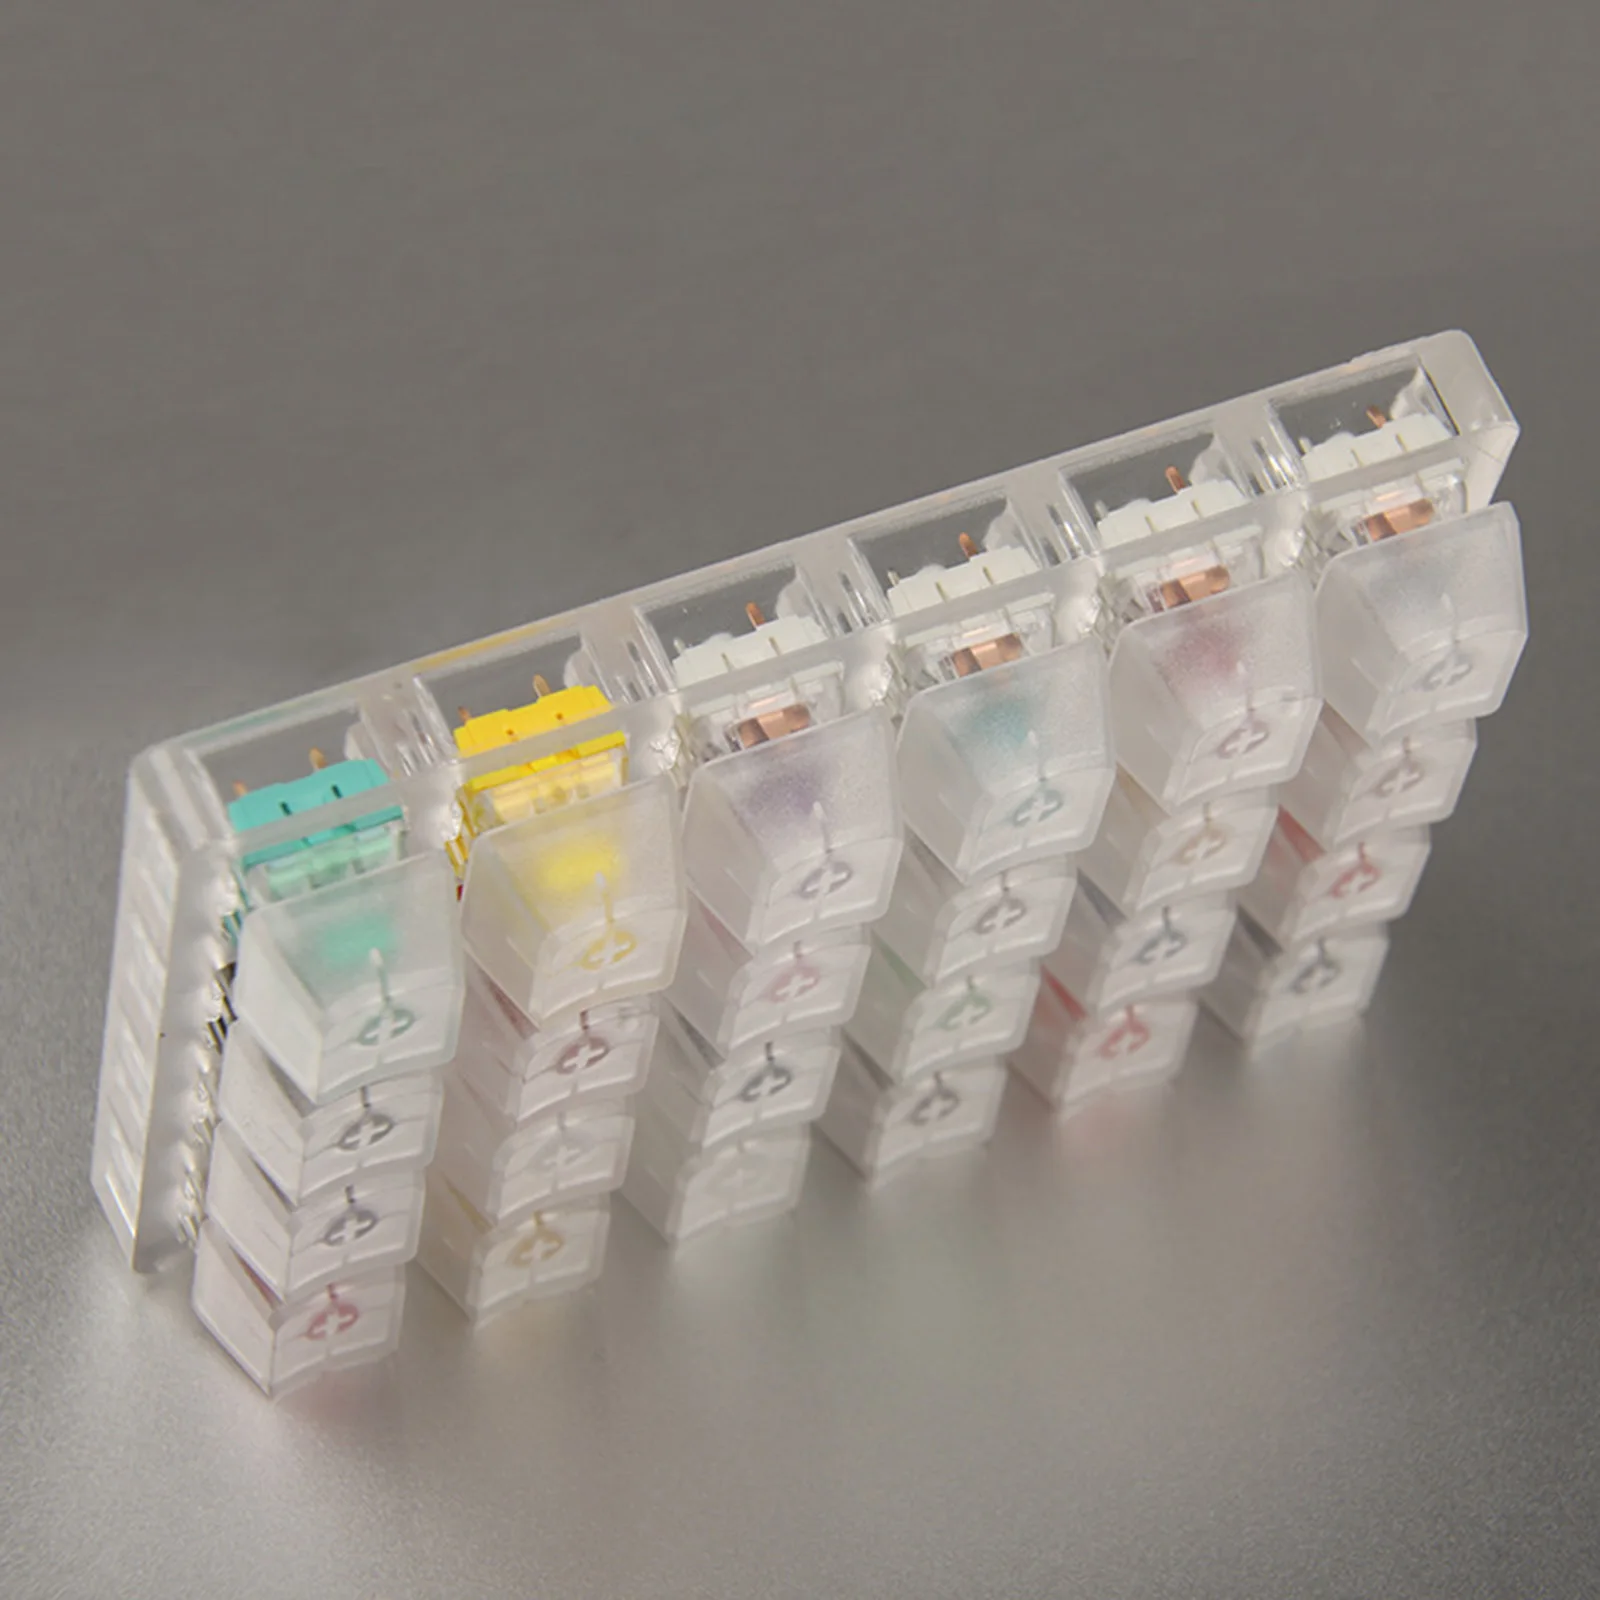 Acrylic 24-Key Clear Switches Tester for Mechanical Keyboard, with Acrylic Base Blank Keycaps